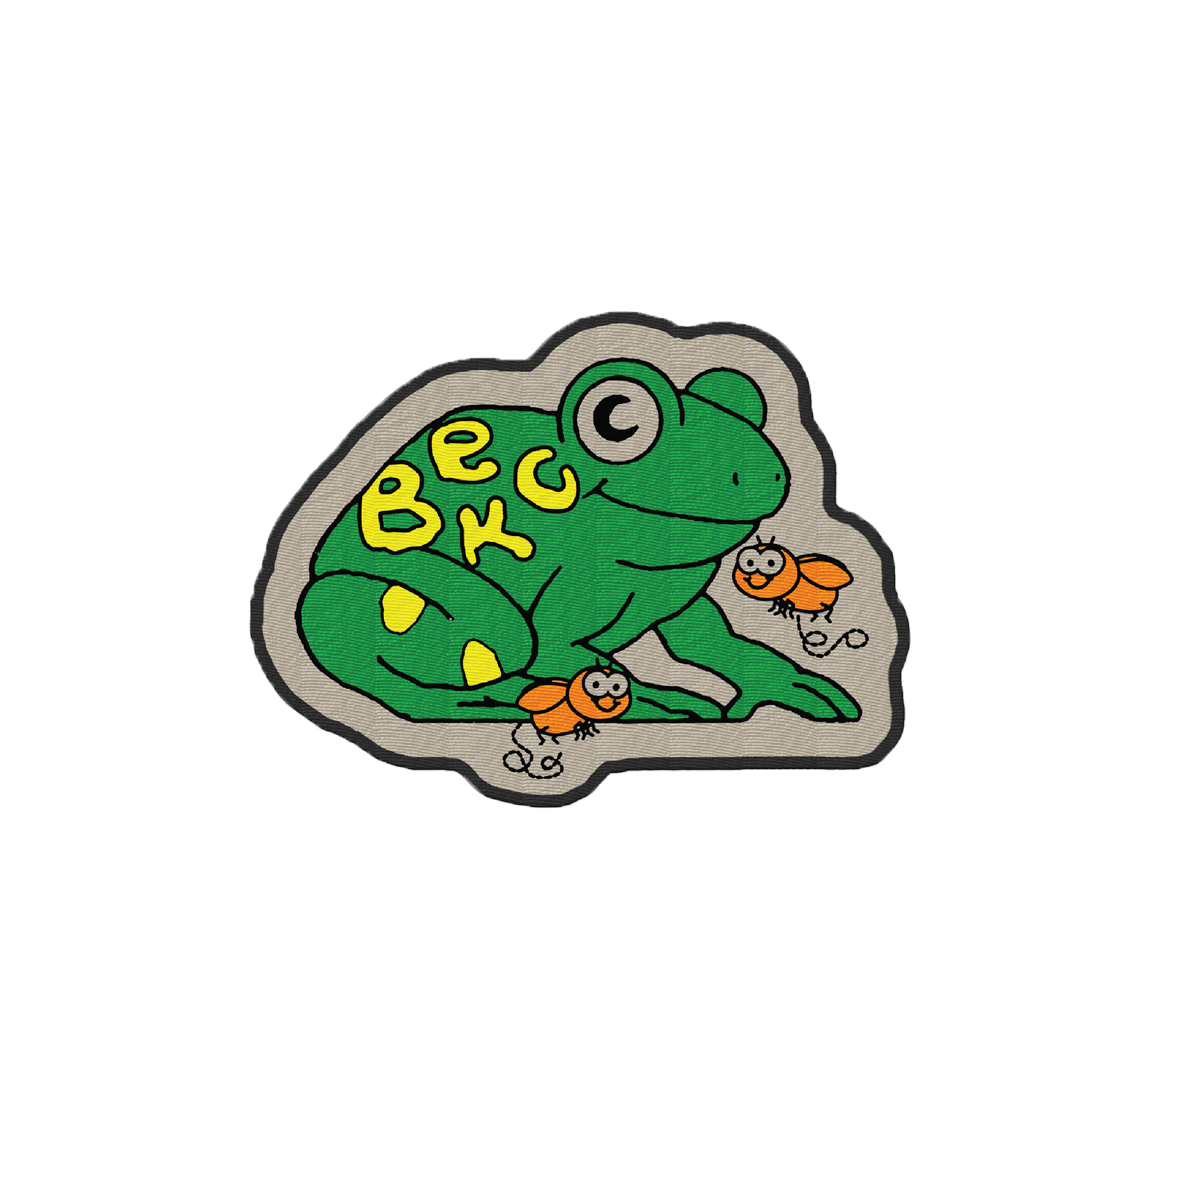 Beck Frog Patch